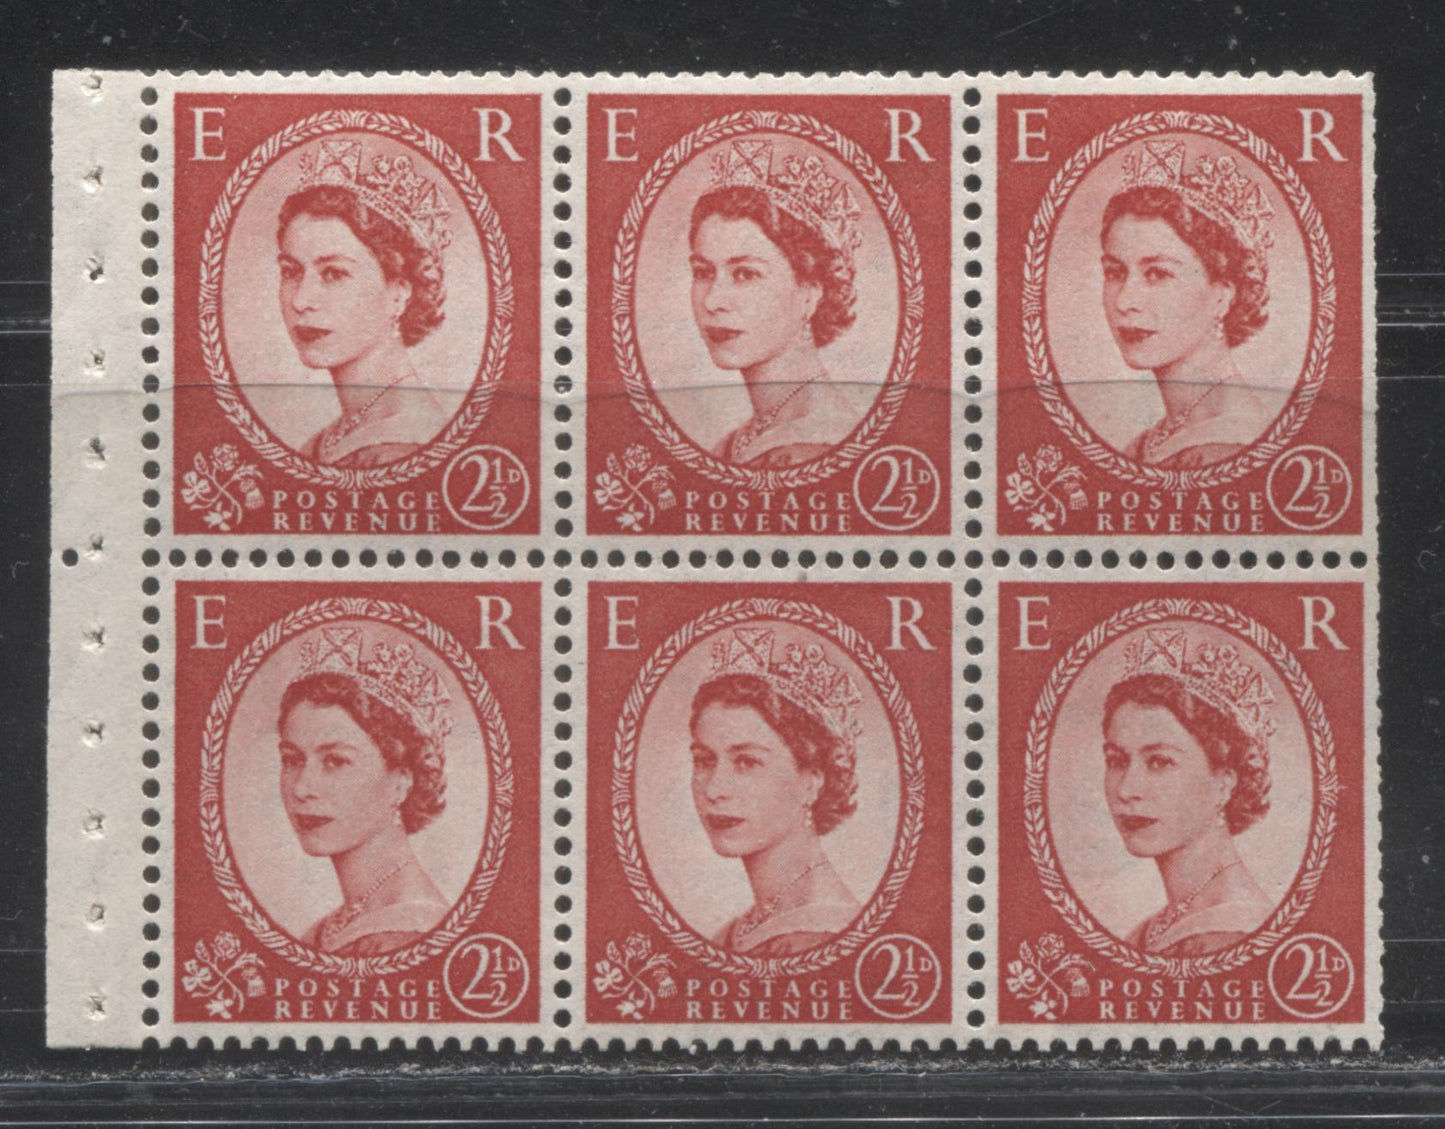 Great Britain SG#H38 5/- Light Grey Blue & Black Cover 1959-1967 Wilding Issue, A Complete Booklet With Inverted Multiple St. Edward's Crown Watermark, Cream Paper, Panes of 6, Type C GPO Cypher, March 1959